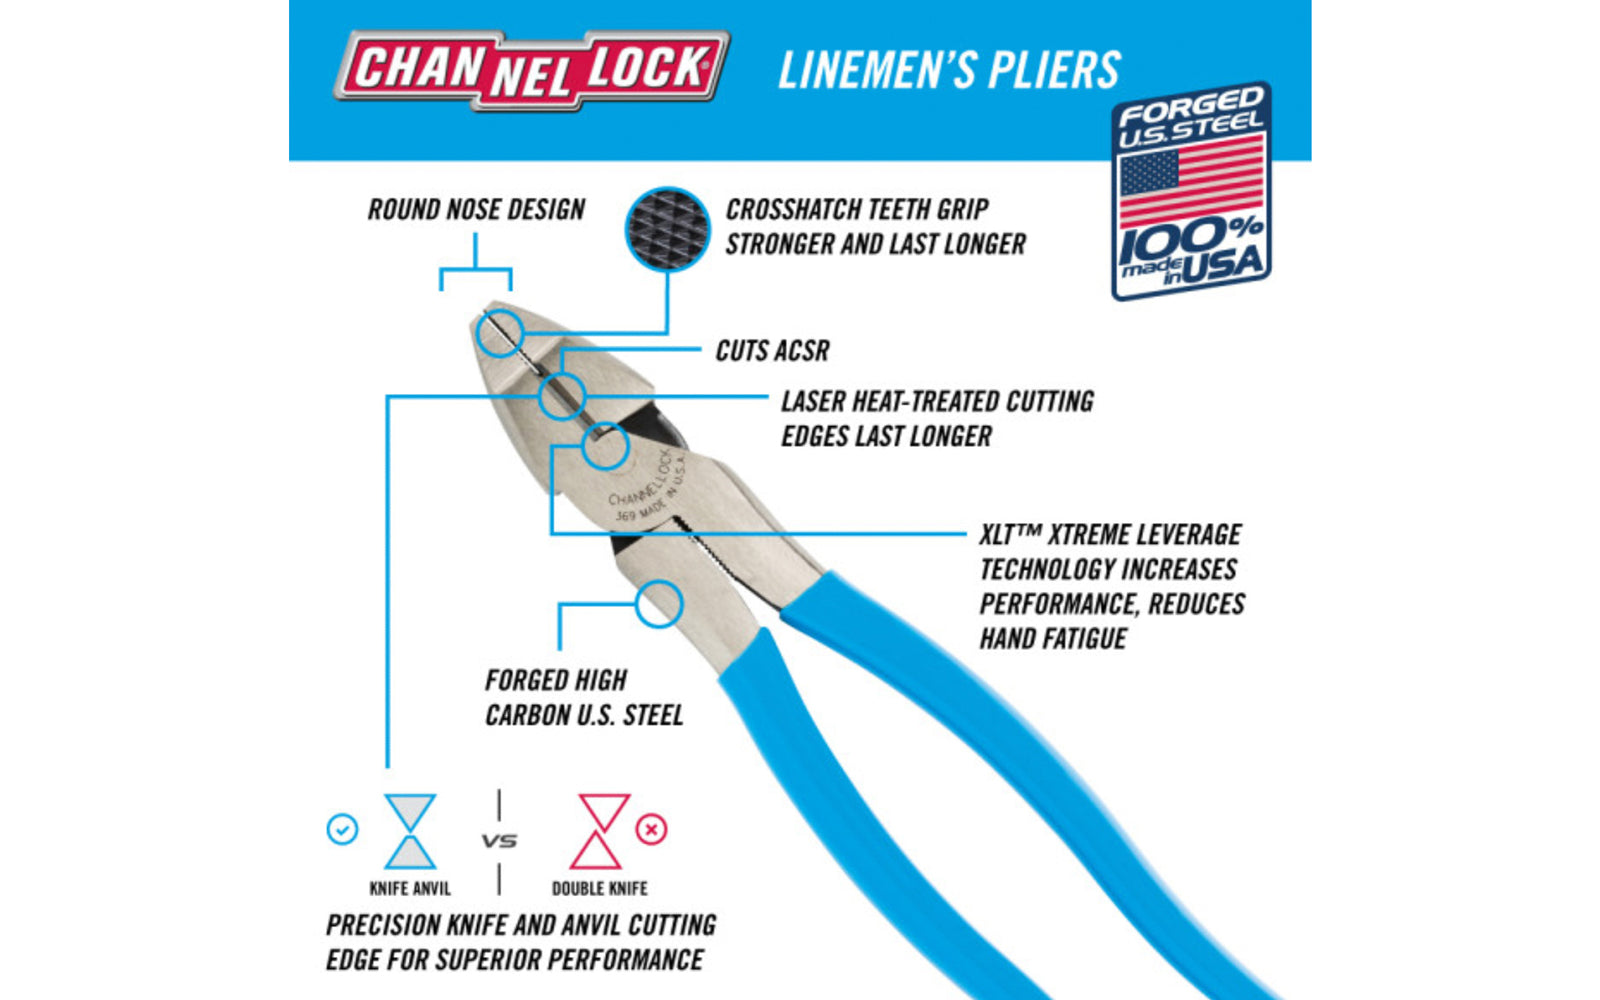 Channellock 9-1/2" Lineman's Pliers "XLT". Round Nose Style. Model 369. Forged high carbon U.S. steel for maximum strength & durability is specially coated for rust prevention. Crosshatch teeth to provide maximum grip. Channelock Linemen's Pliers. Cuts ACSR. Made in USA.